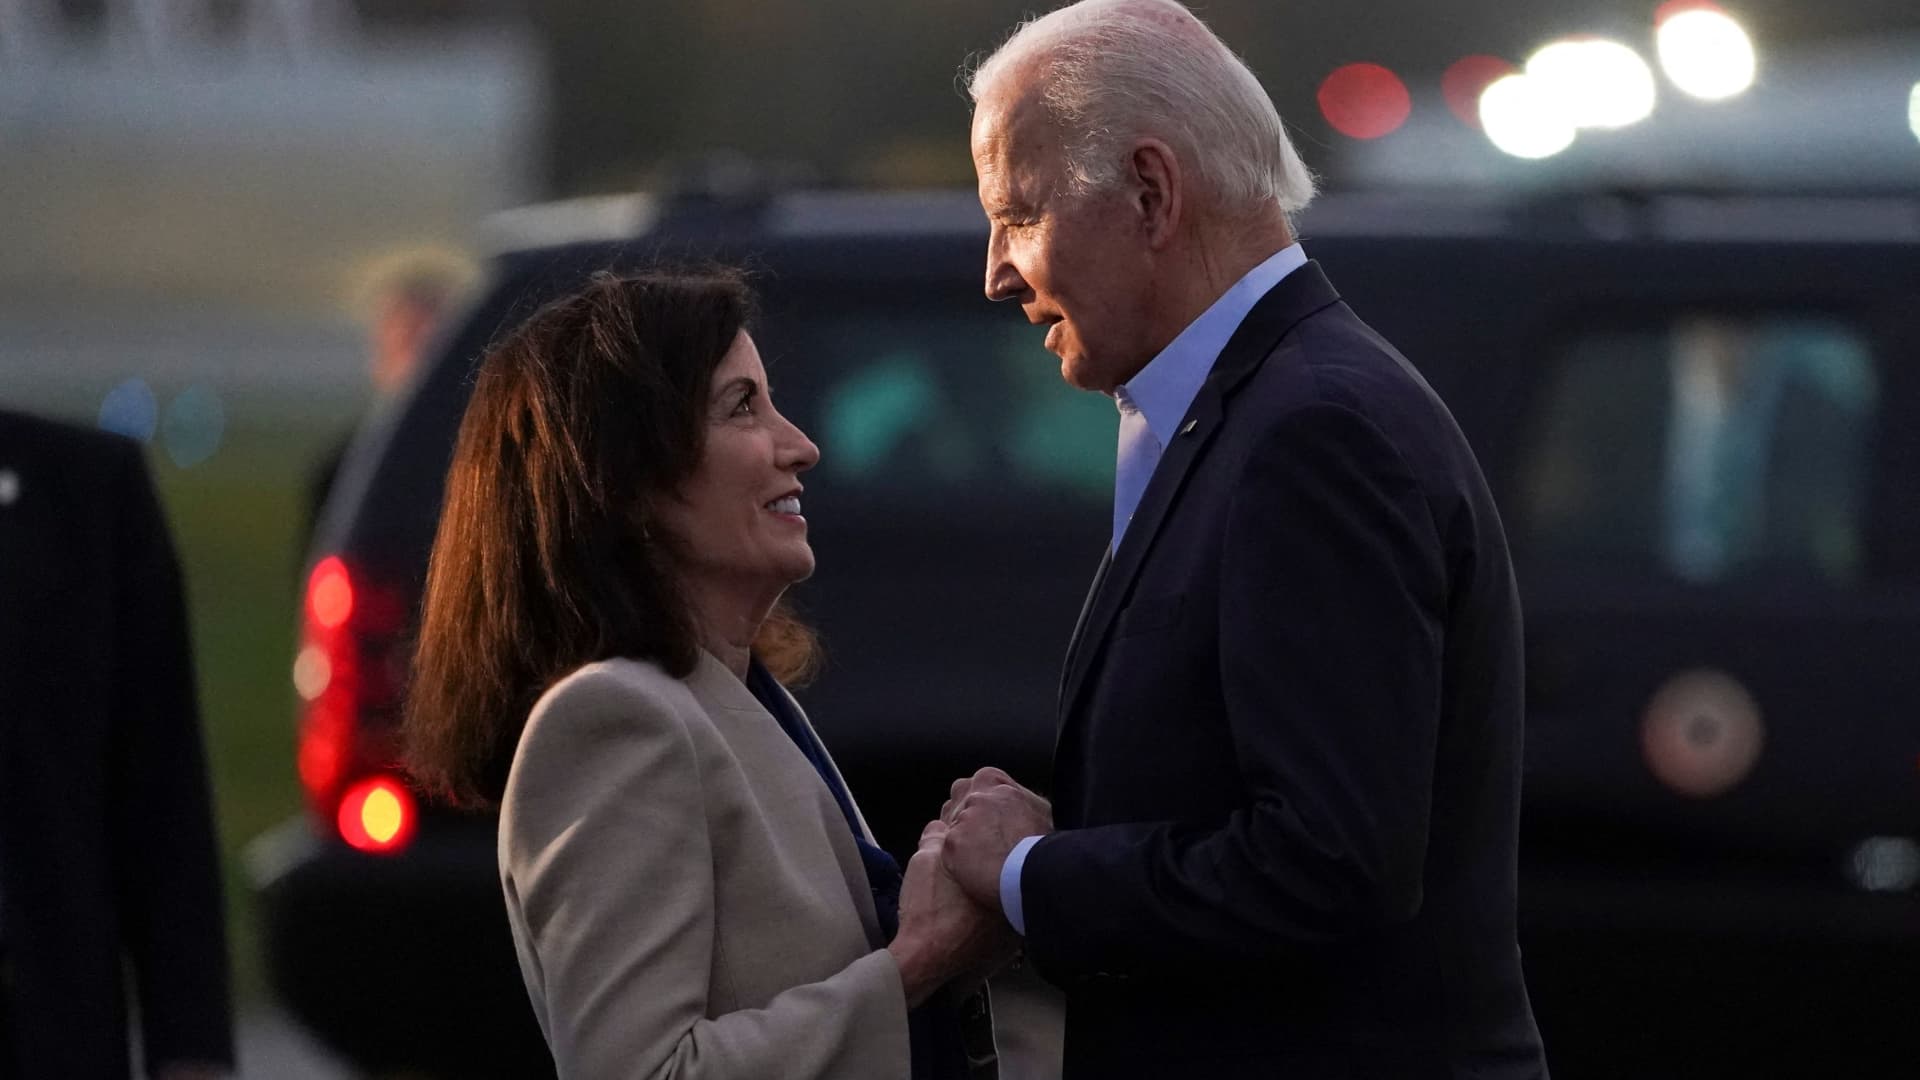 President Joe Biden is greeted by Democratic incumbent Governor Kathy Hochul as he arrives at Westchester County Airport, to speak at her campaign rally and other New York Democrats in Westchester County, U.S., November 6, 2022. 